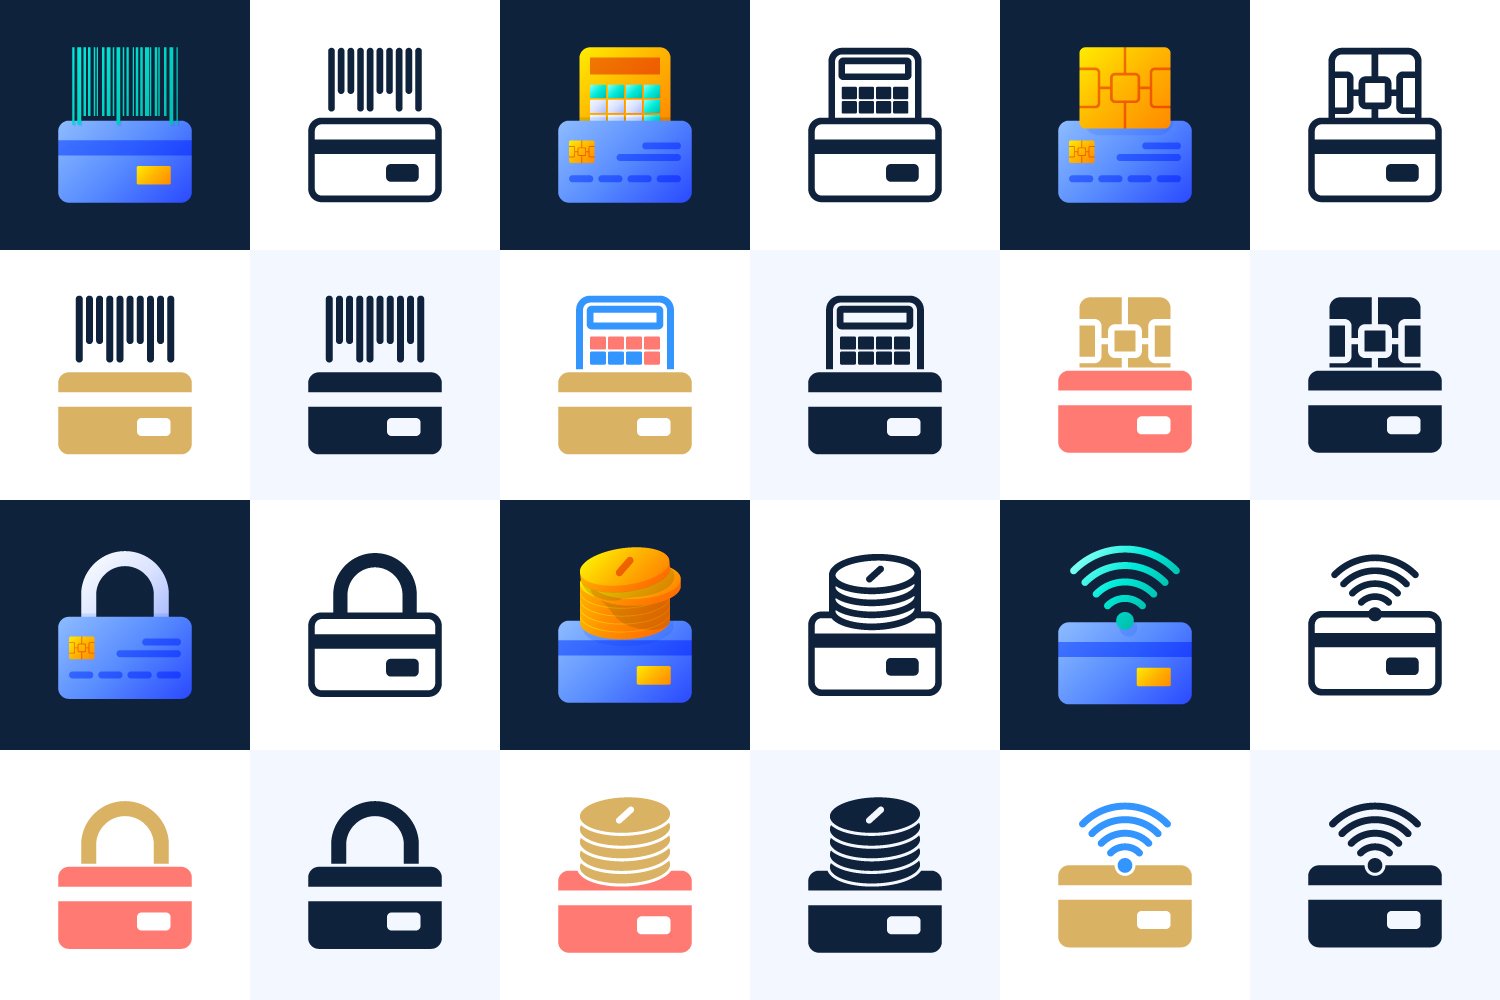 Icons will be a great addition to your presentation and dilute text content.